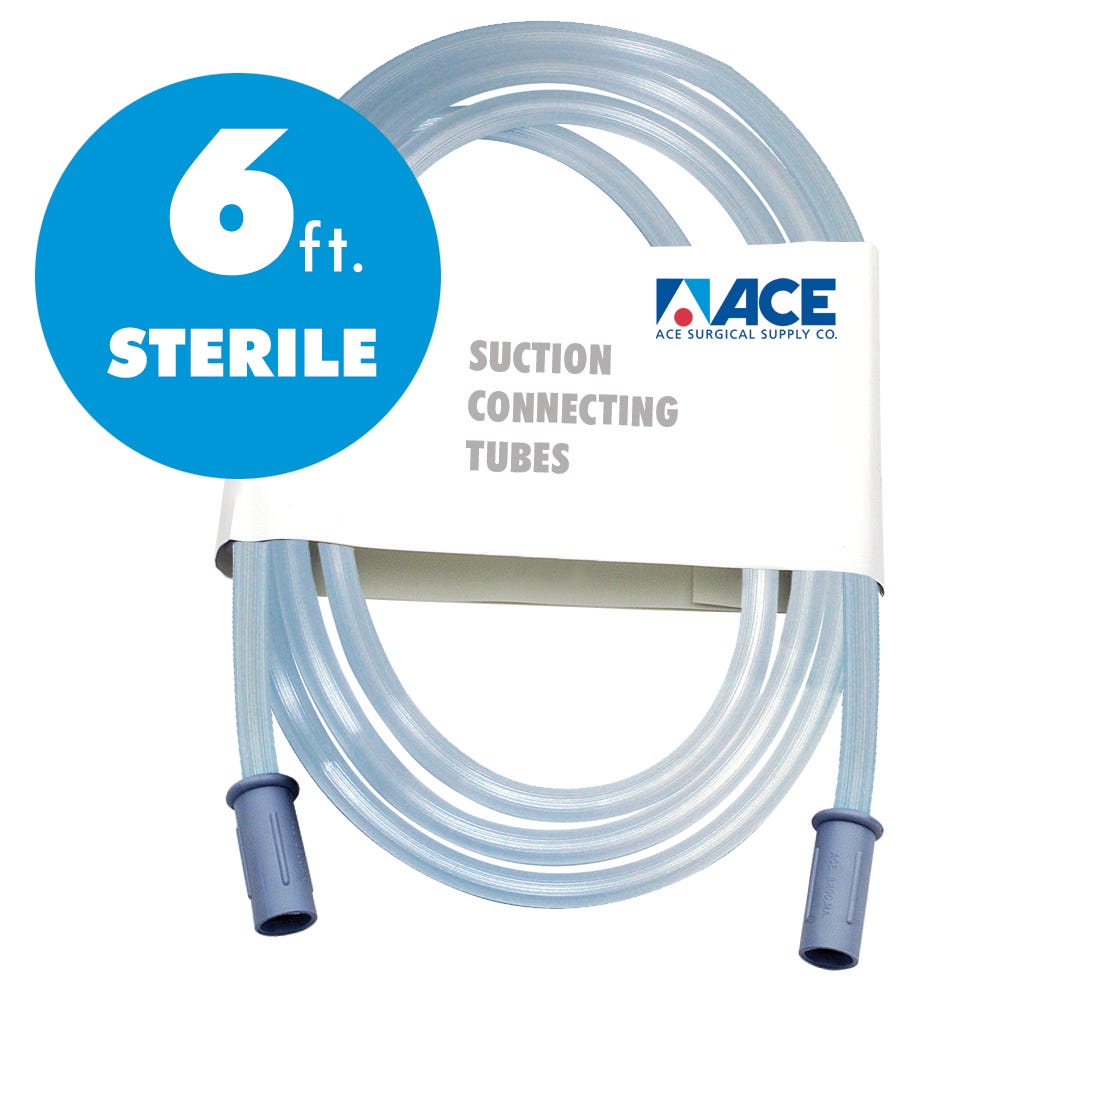 ACE Suction Connection Tubing Sterile - Clear with Blue Tint, 6' long, 1/4" I.D. -20/Case